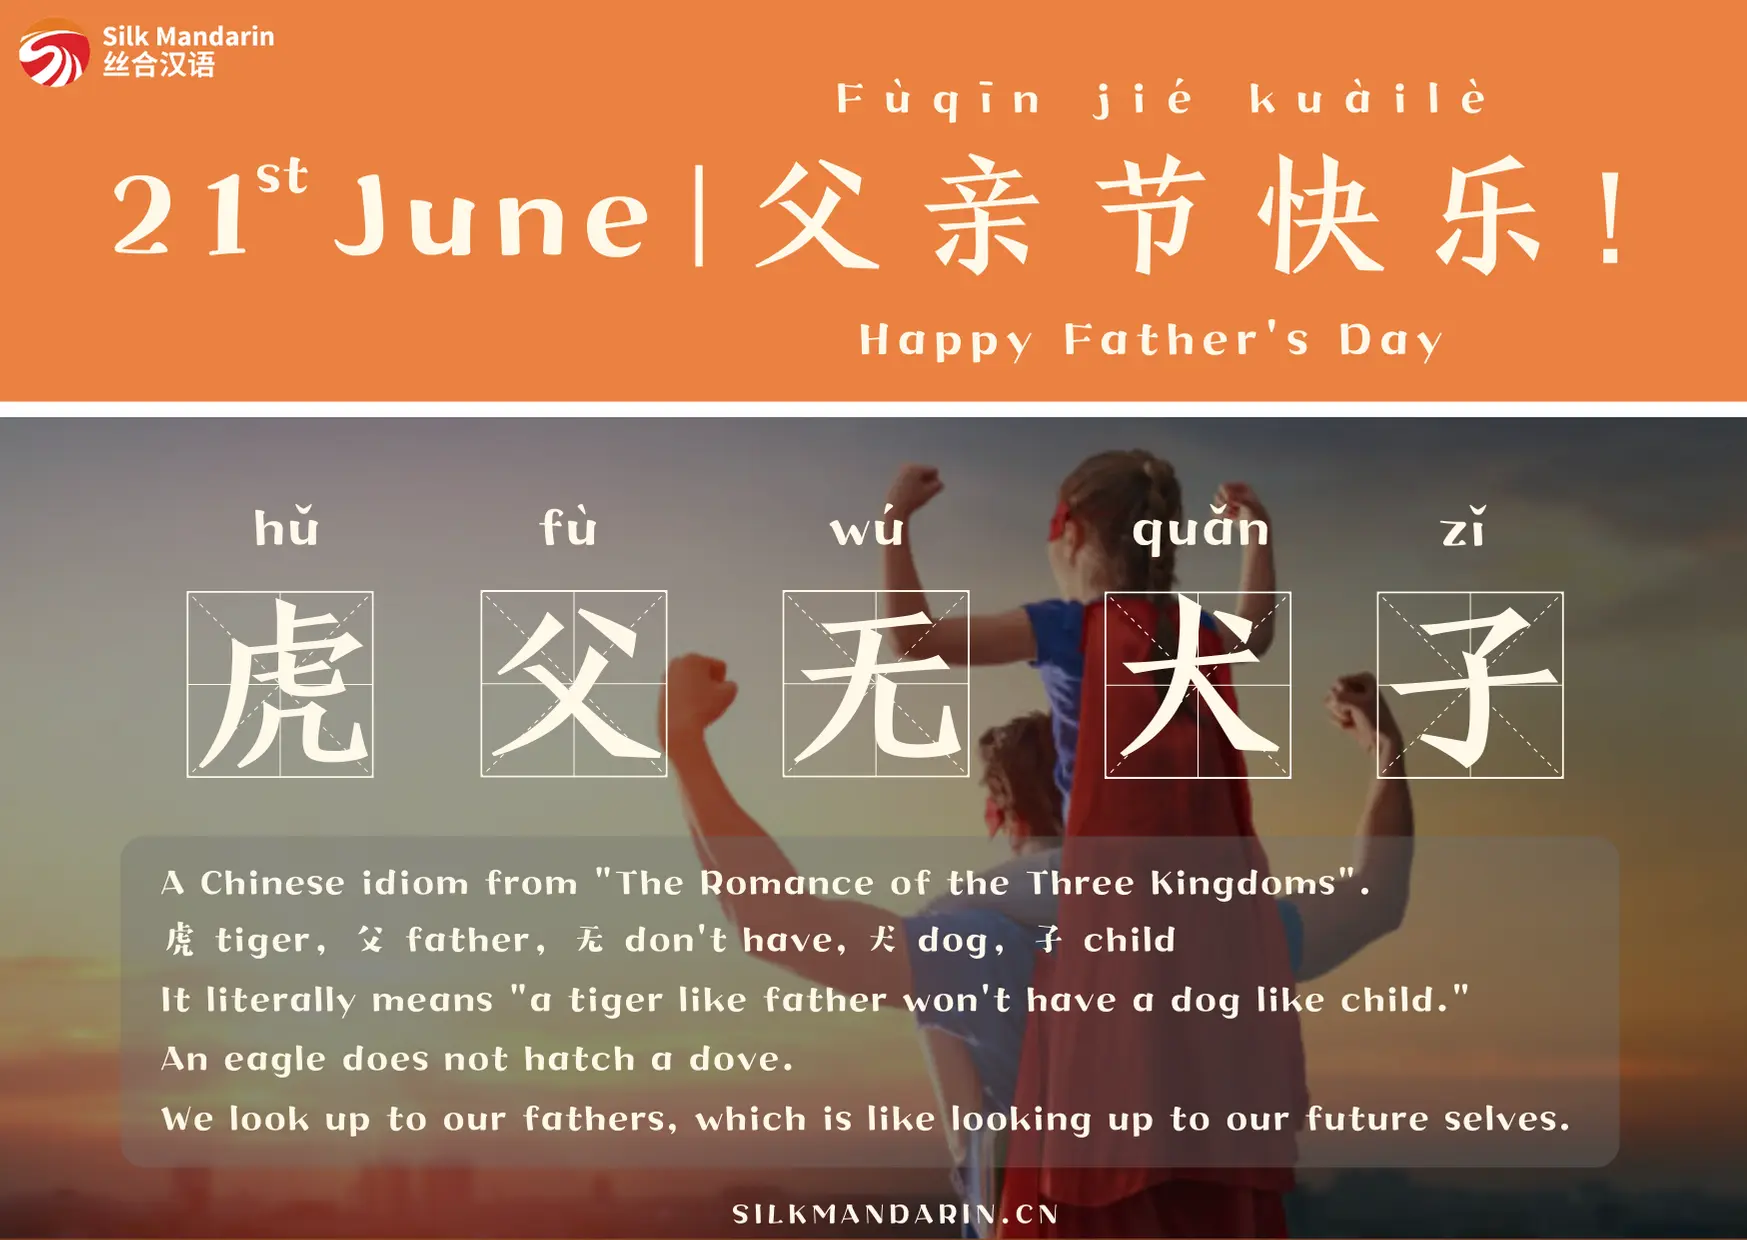 Silk Mandarin wishes all the fathers in the world a brilliant Father's Day!